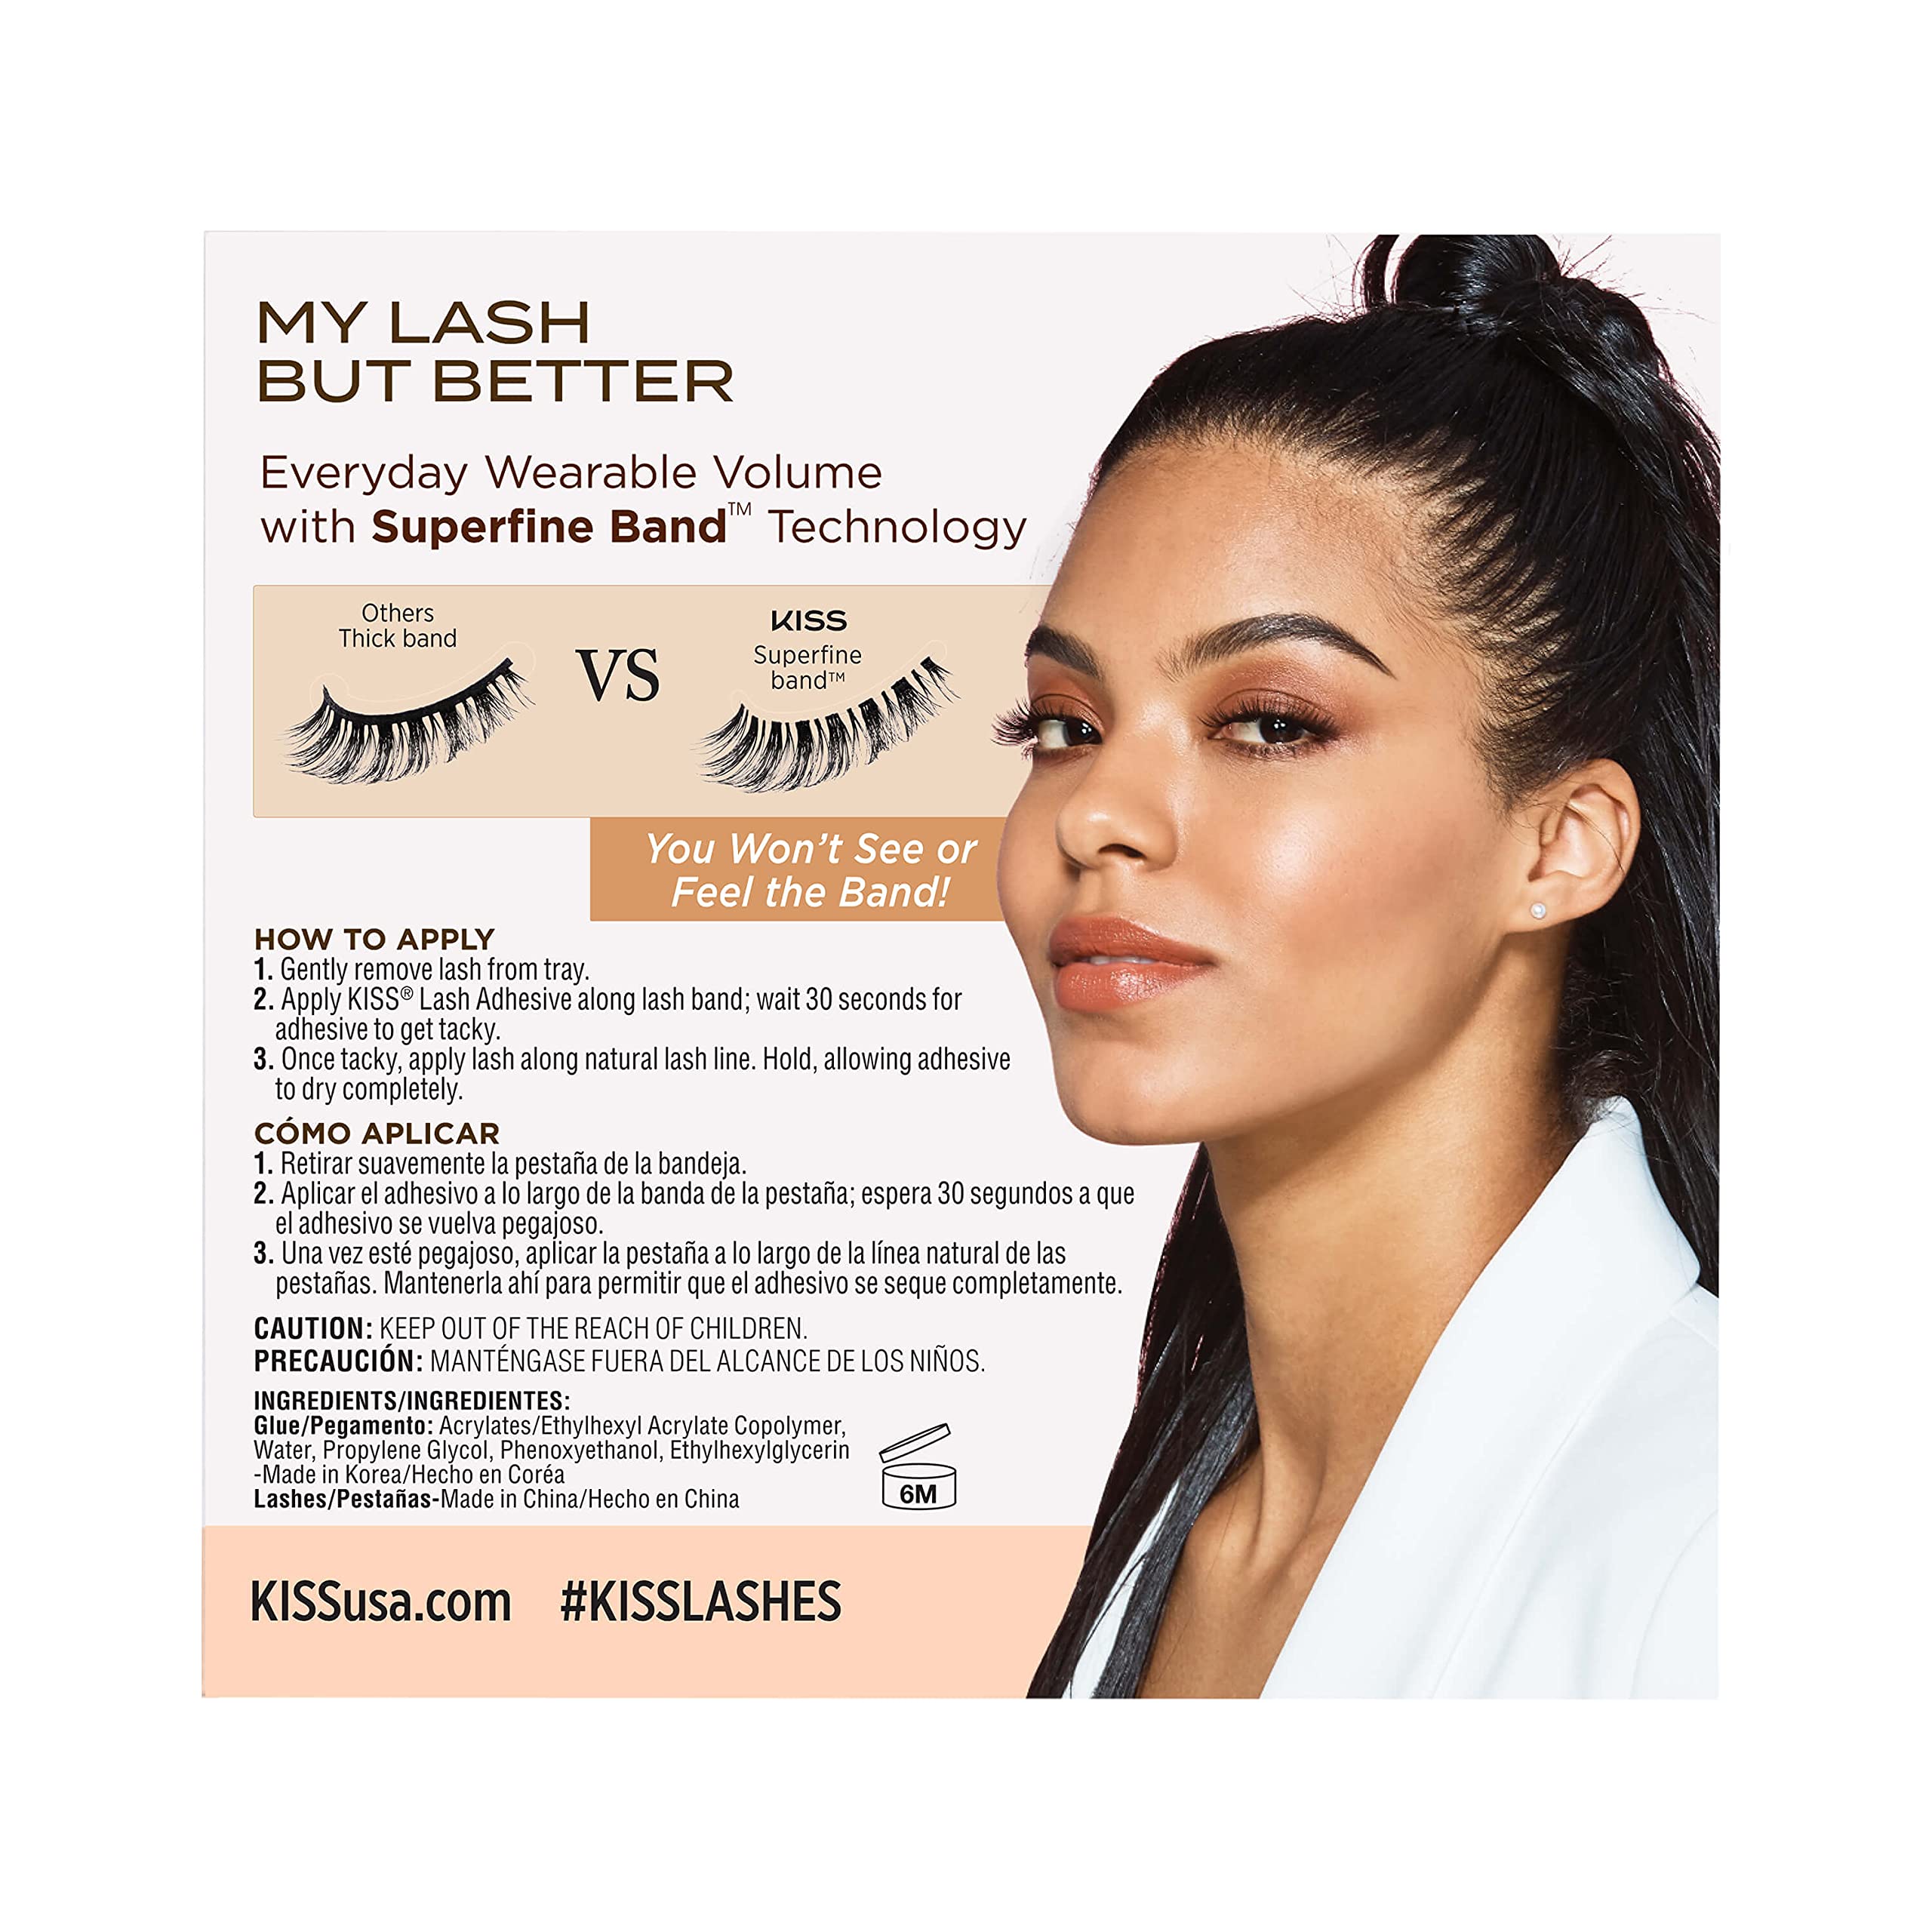 KISS MLBB My Lash But Better False Eyelashes, Everyday Wearable Volume with Superfine Band Technology, Easy To Apply, Reusable, Cruelty-Free, Contact Lens Friendly, Style 'All Mine', 1 Pair Fake Eyelashes